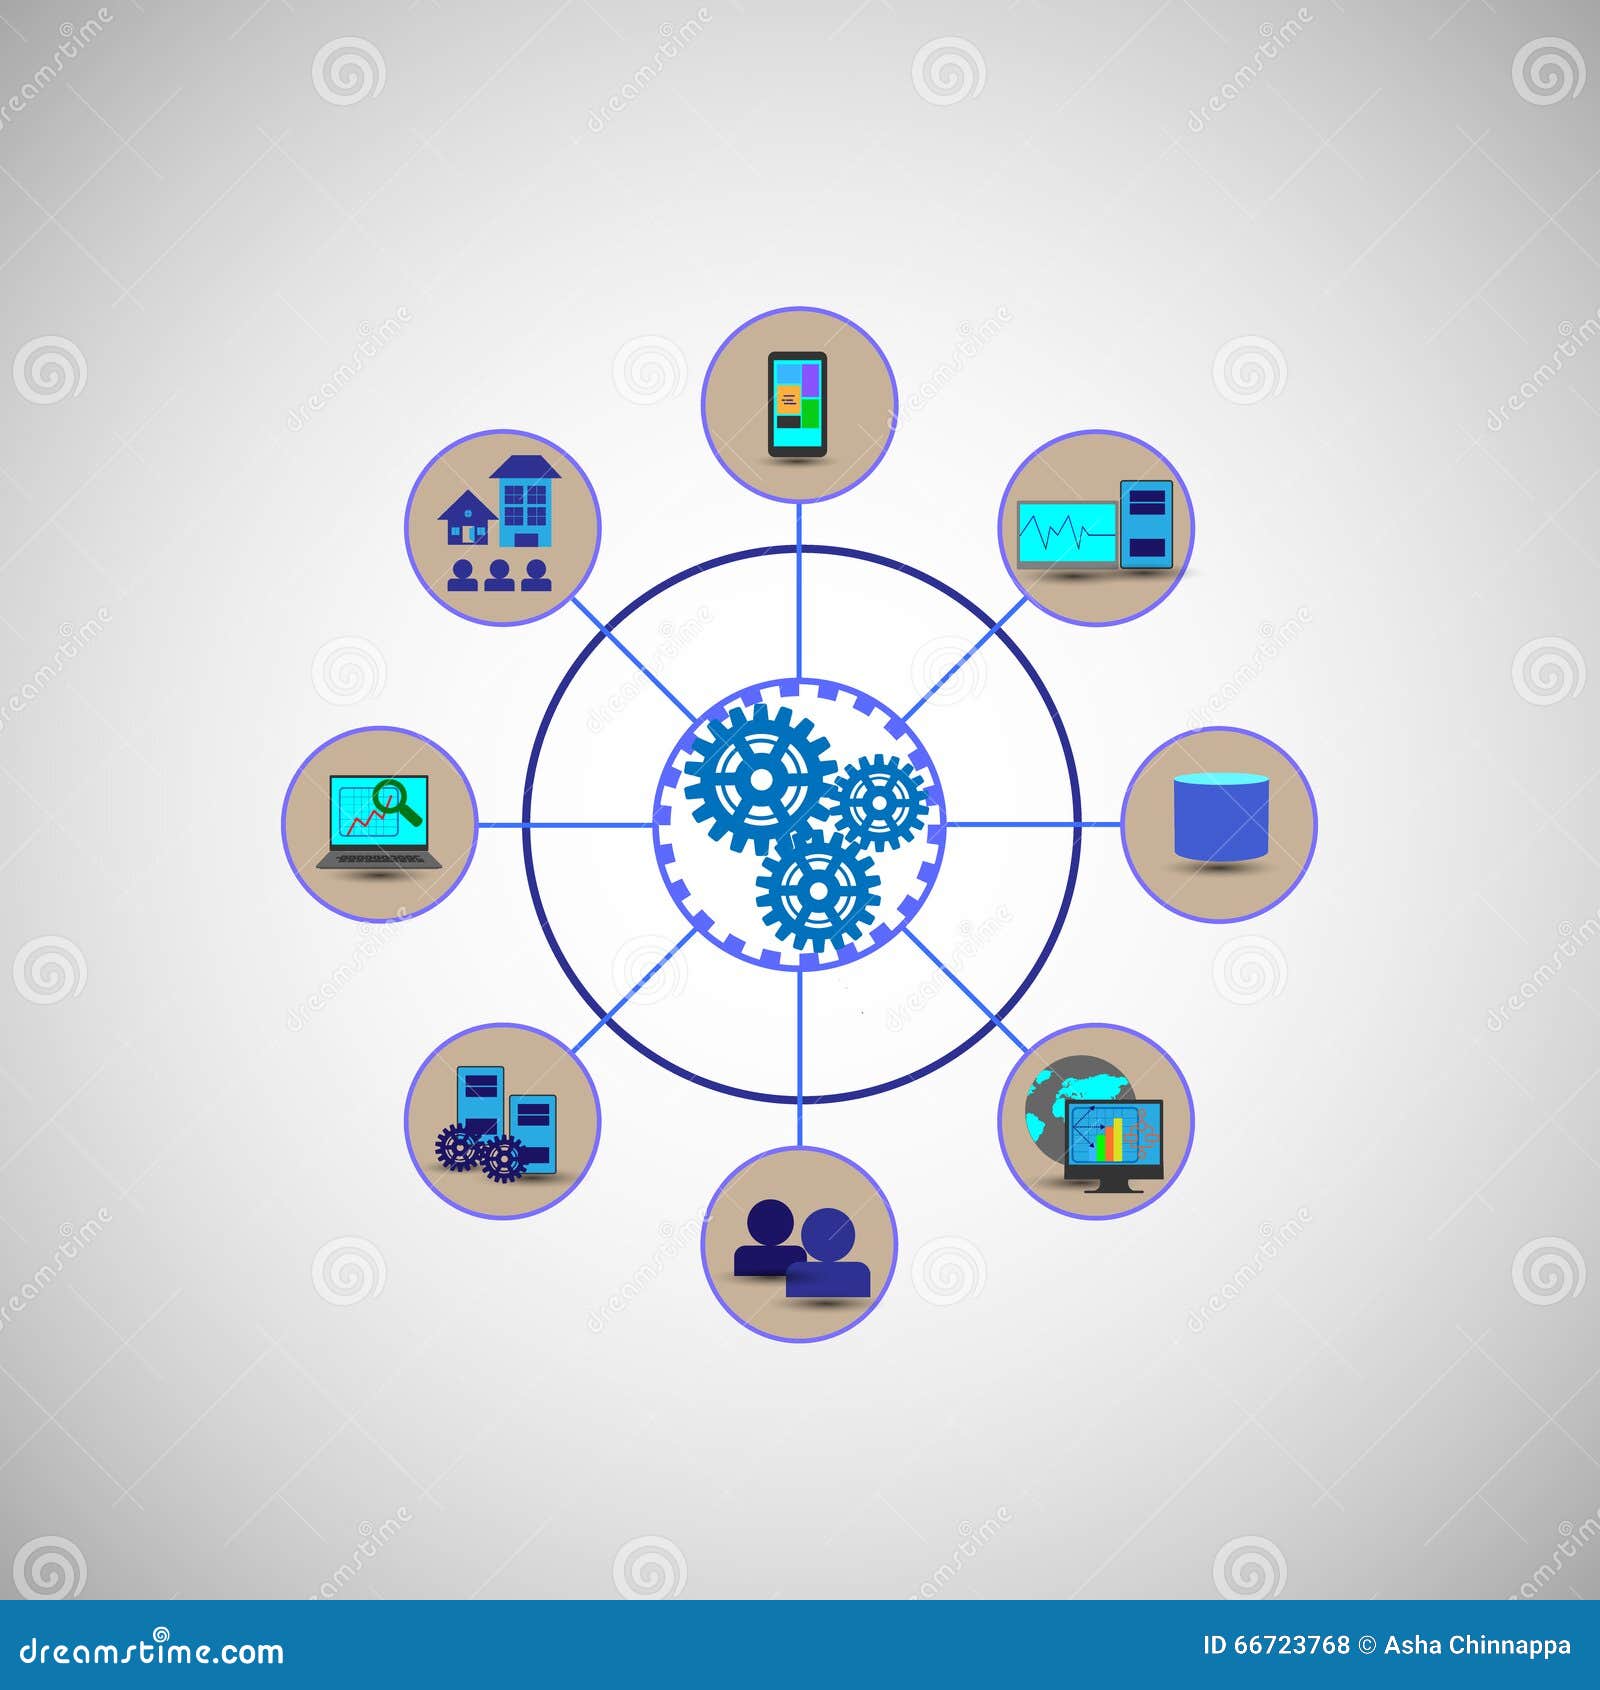 concept of system connectivity, employees, users connecting various enterprise application systems